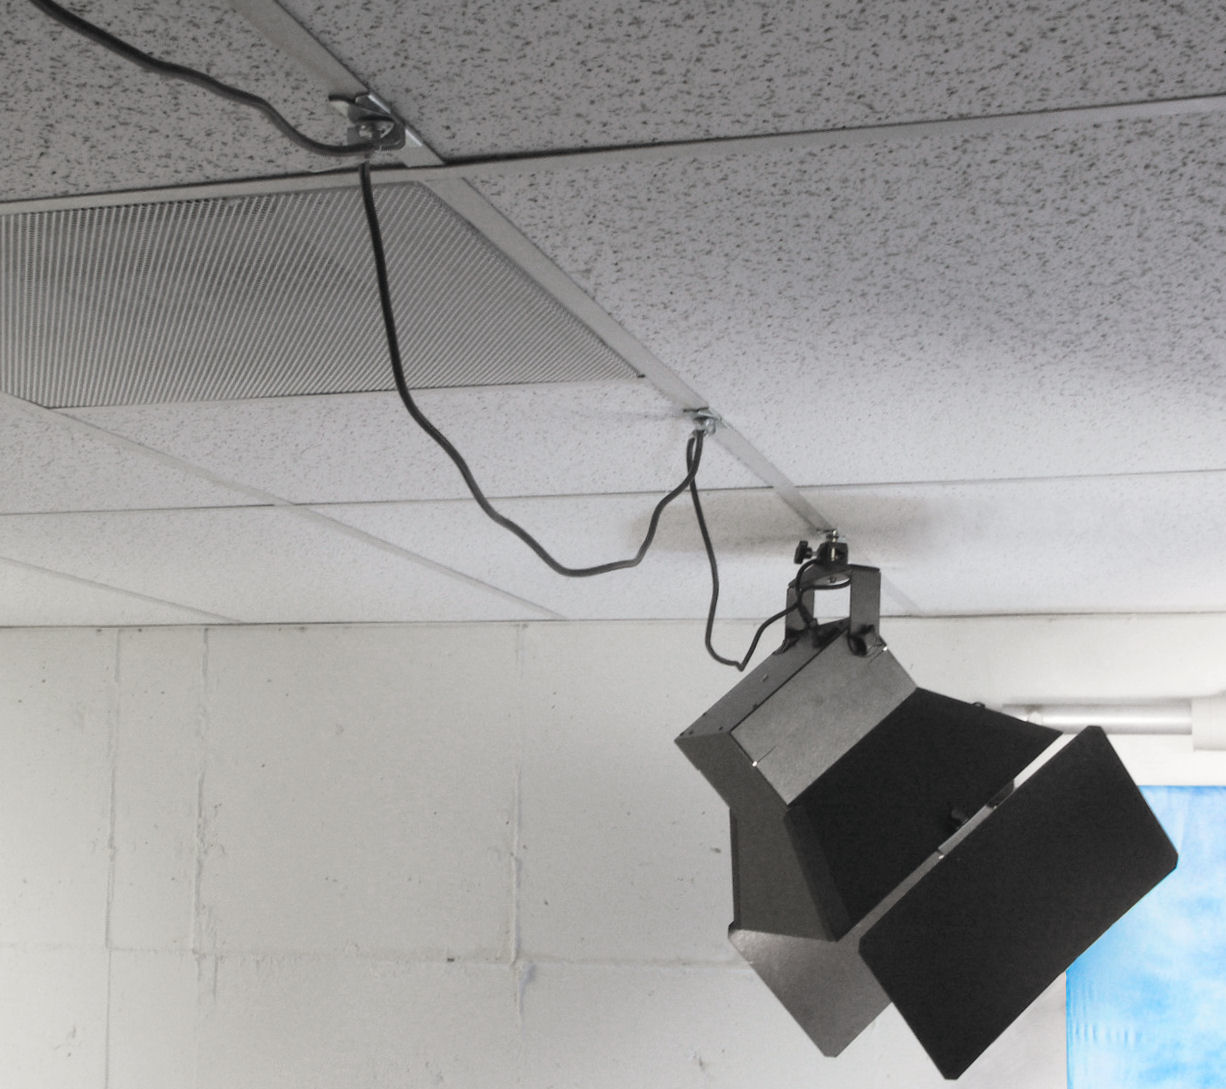 Alzo Suspended Drop Ceiling Photo Video Light Mount Kit